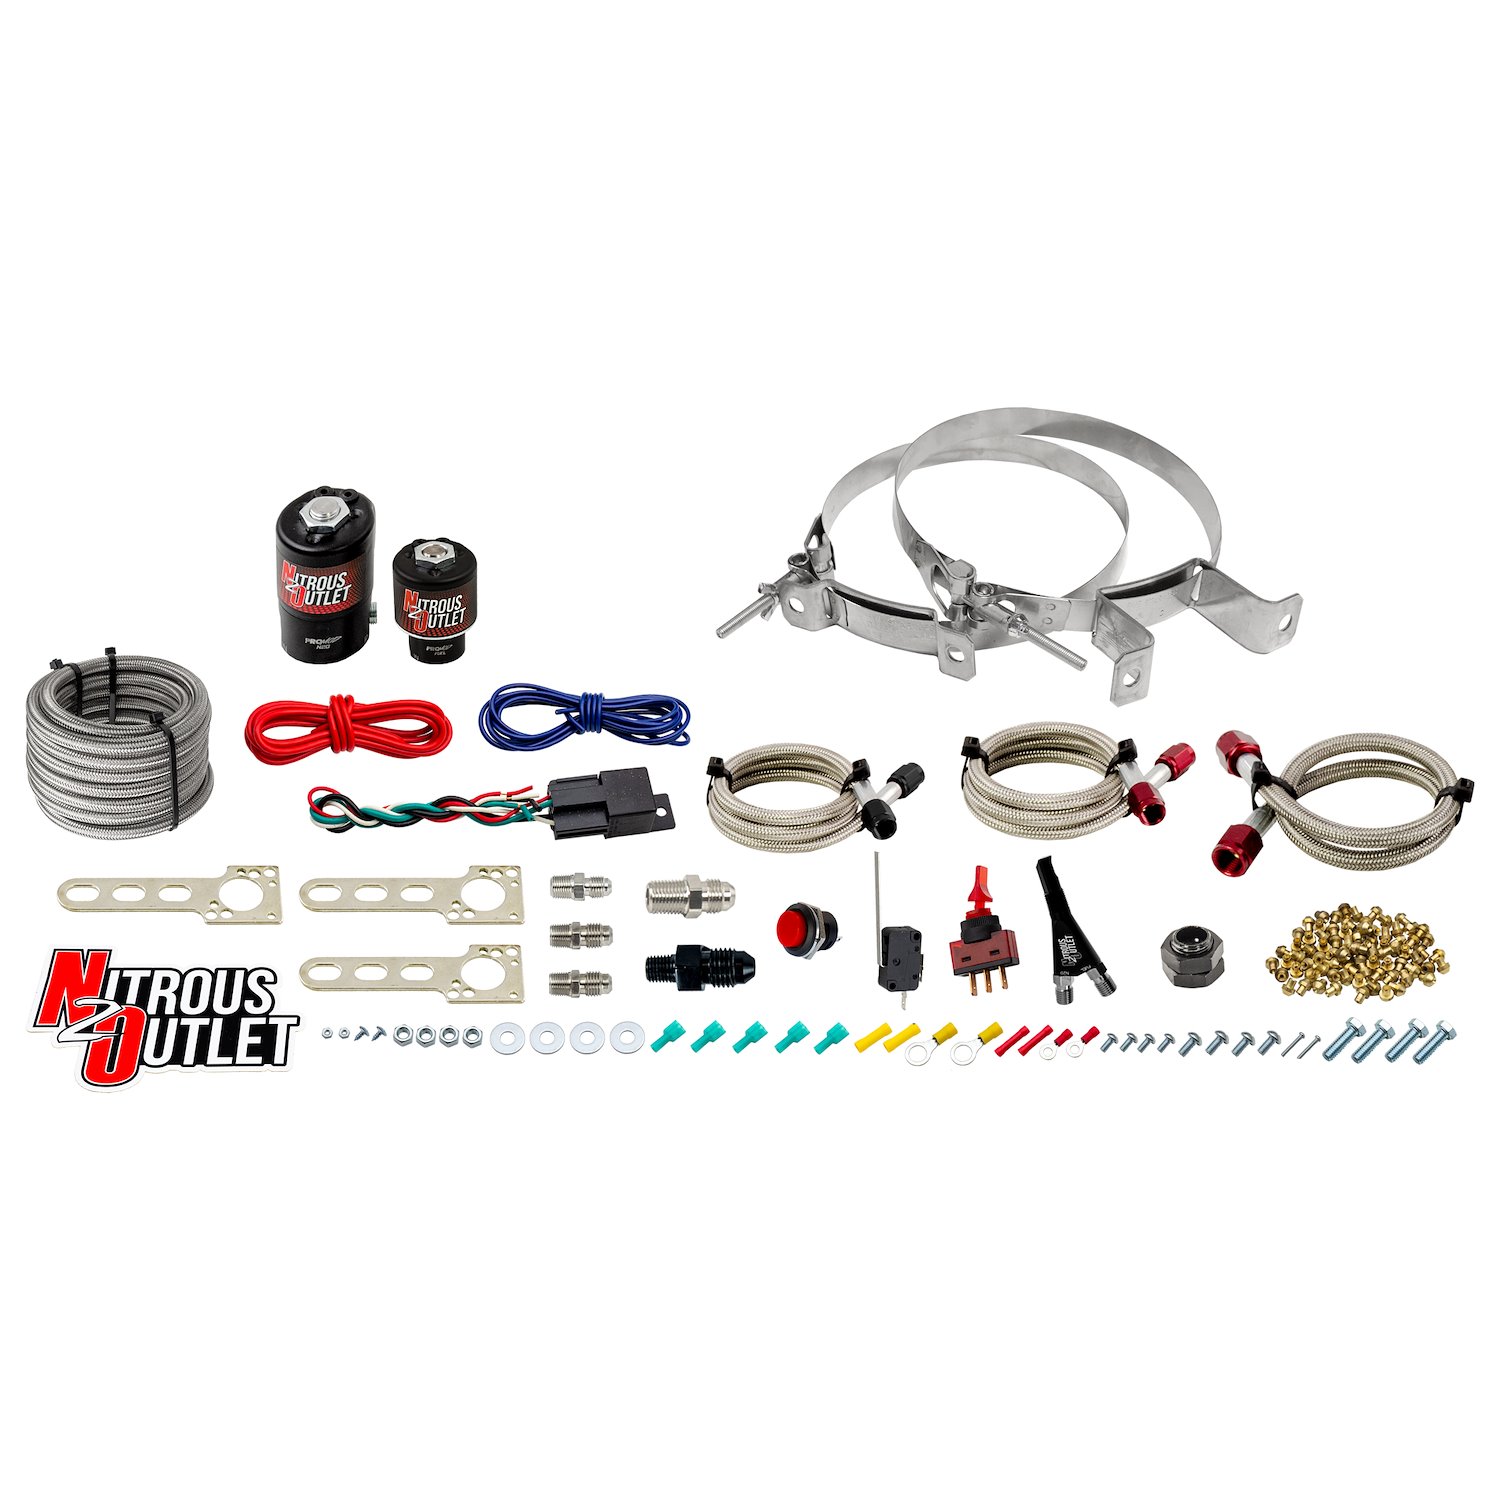 00-10010-00 EFI Single-Nozzle System, 1987-1998 Ford Mustang, Gas/E85, 5-55psi, 35-200HP, No Bottle